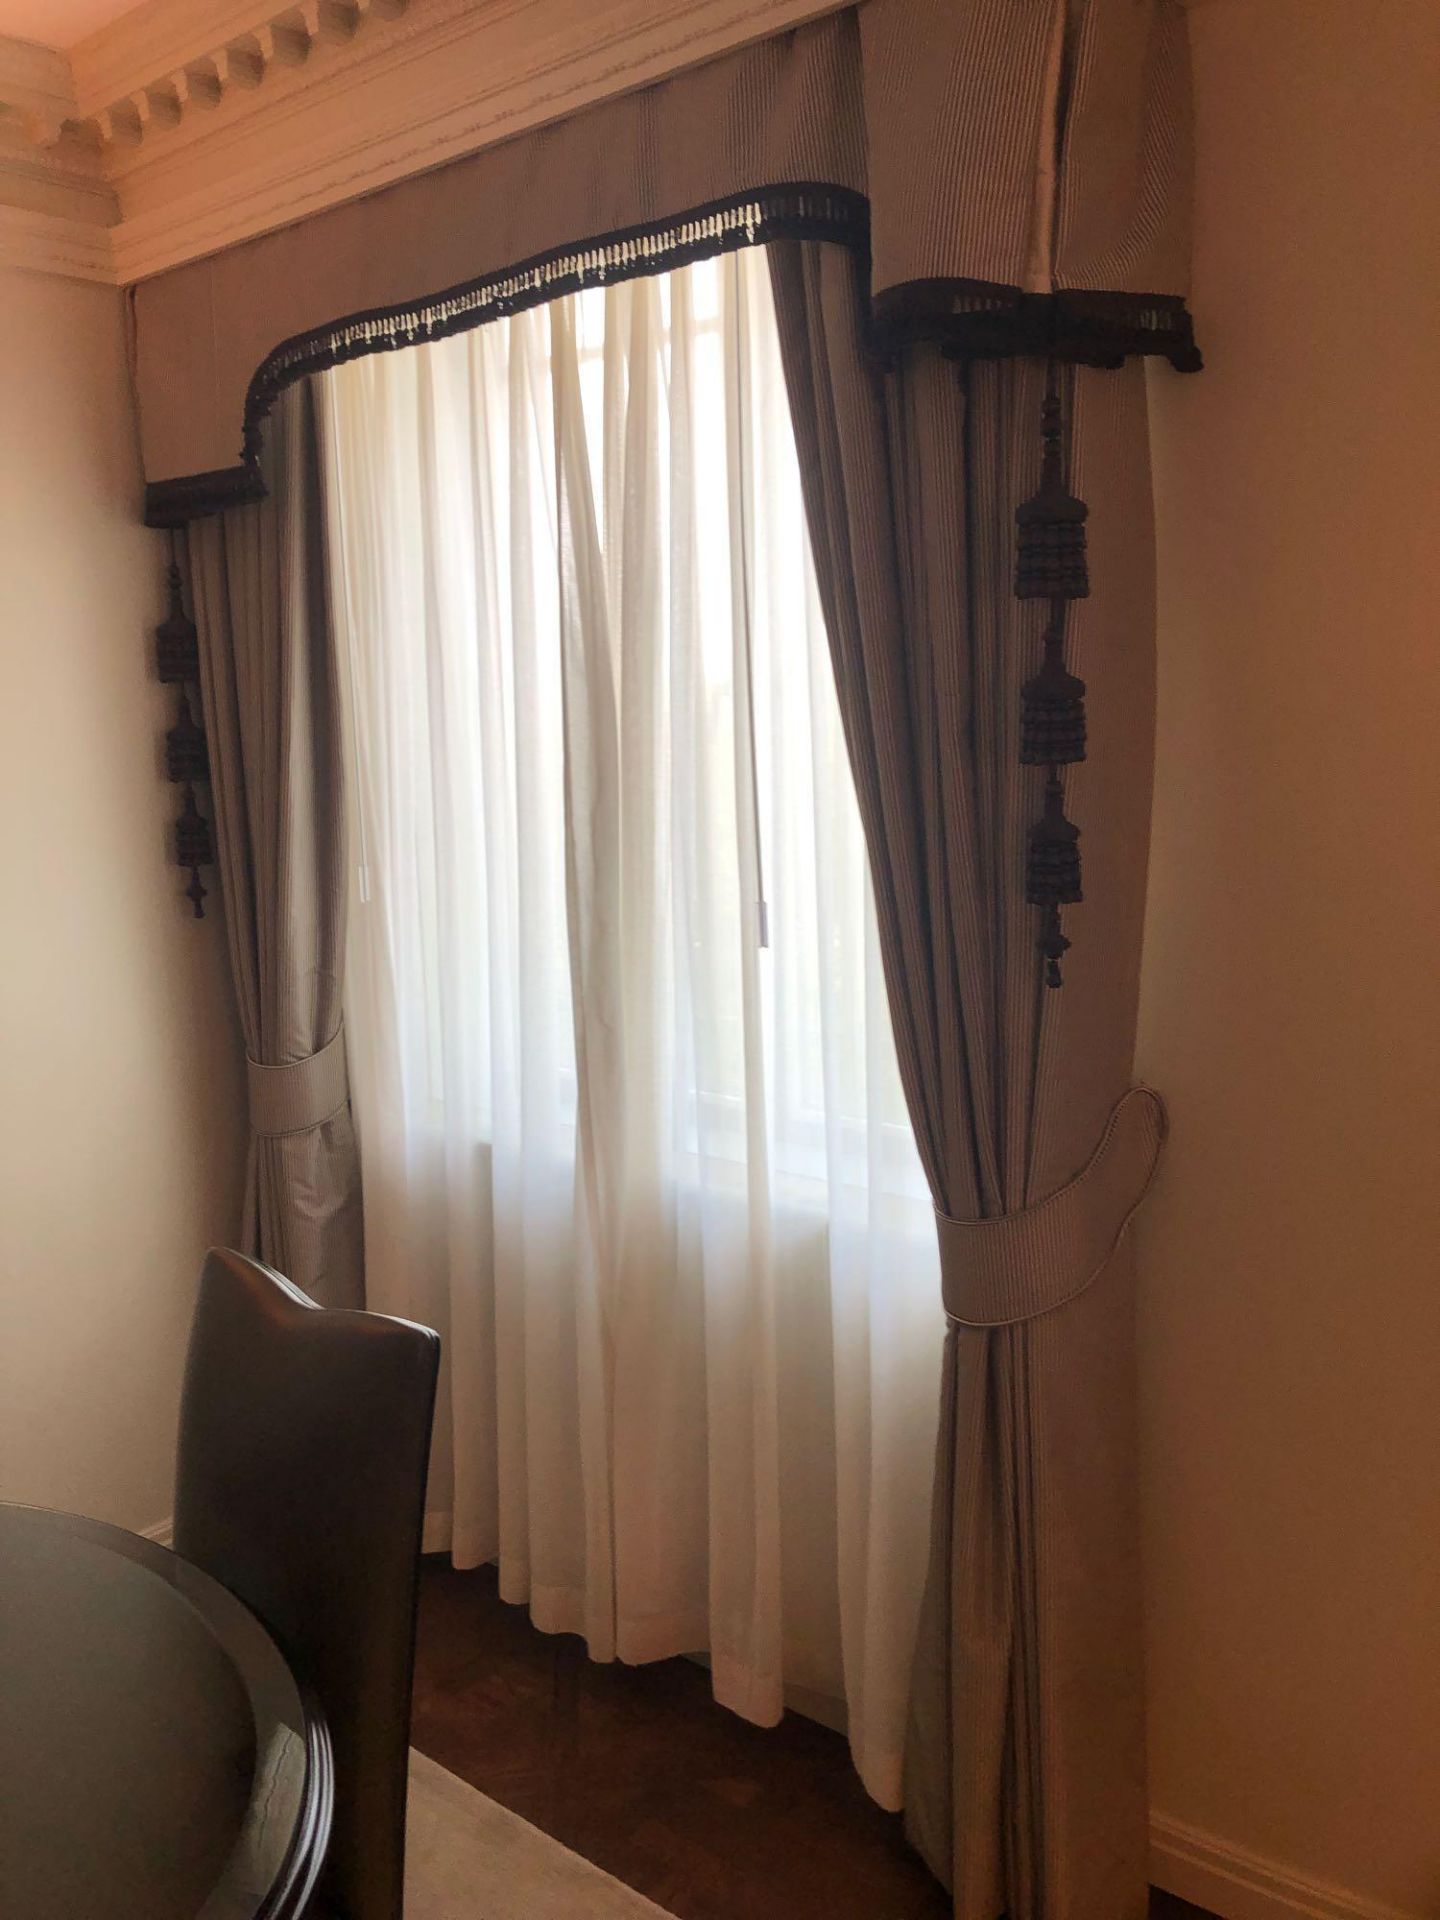 A Pair Of Drapes Fabric In Brown And White Striped Complete With Pelmet And Tassels 257 x 180cm (